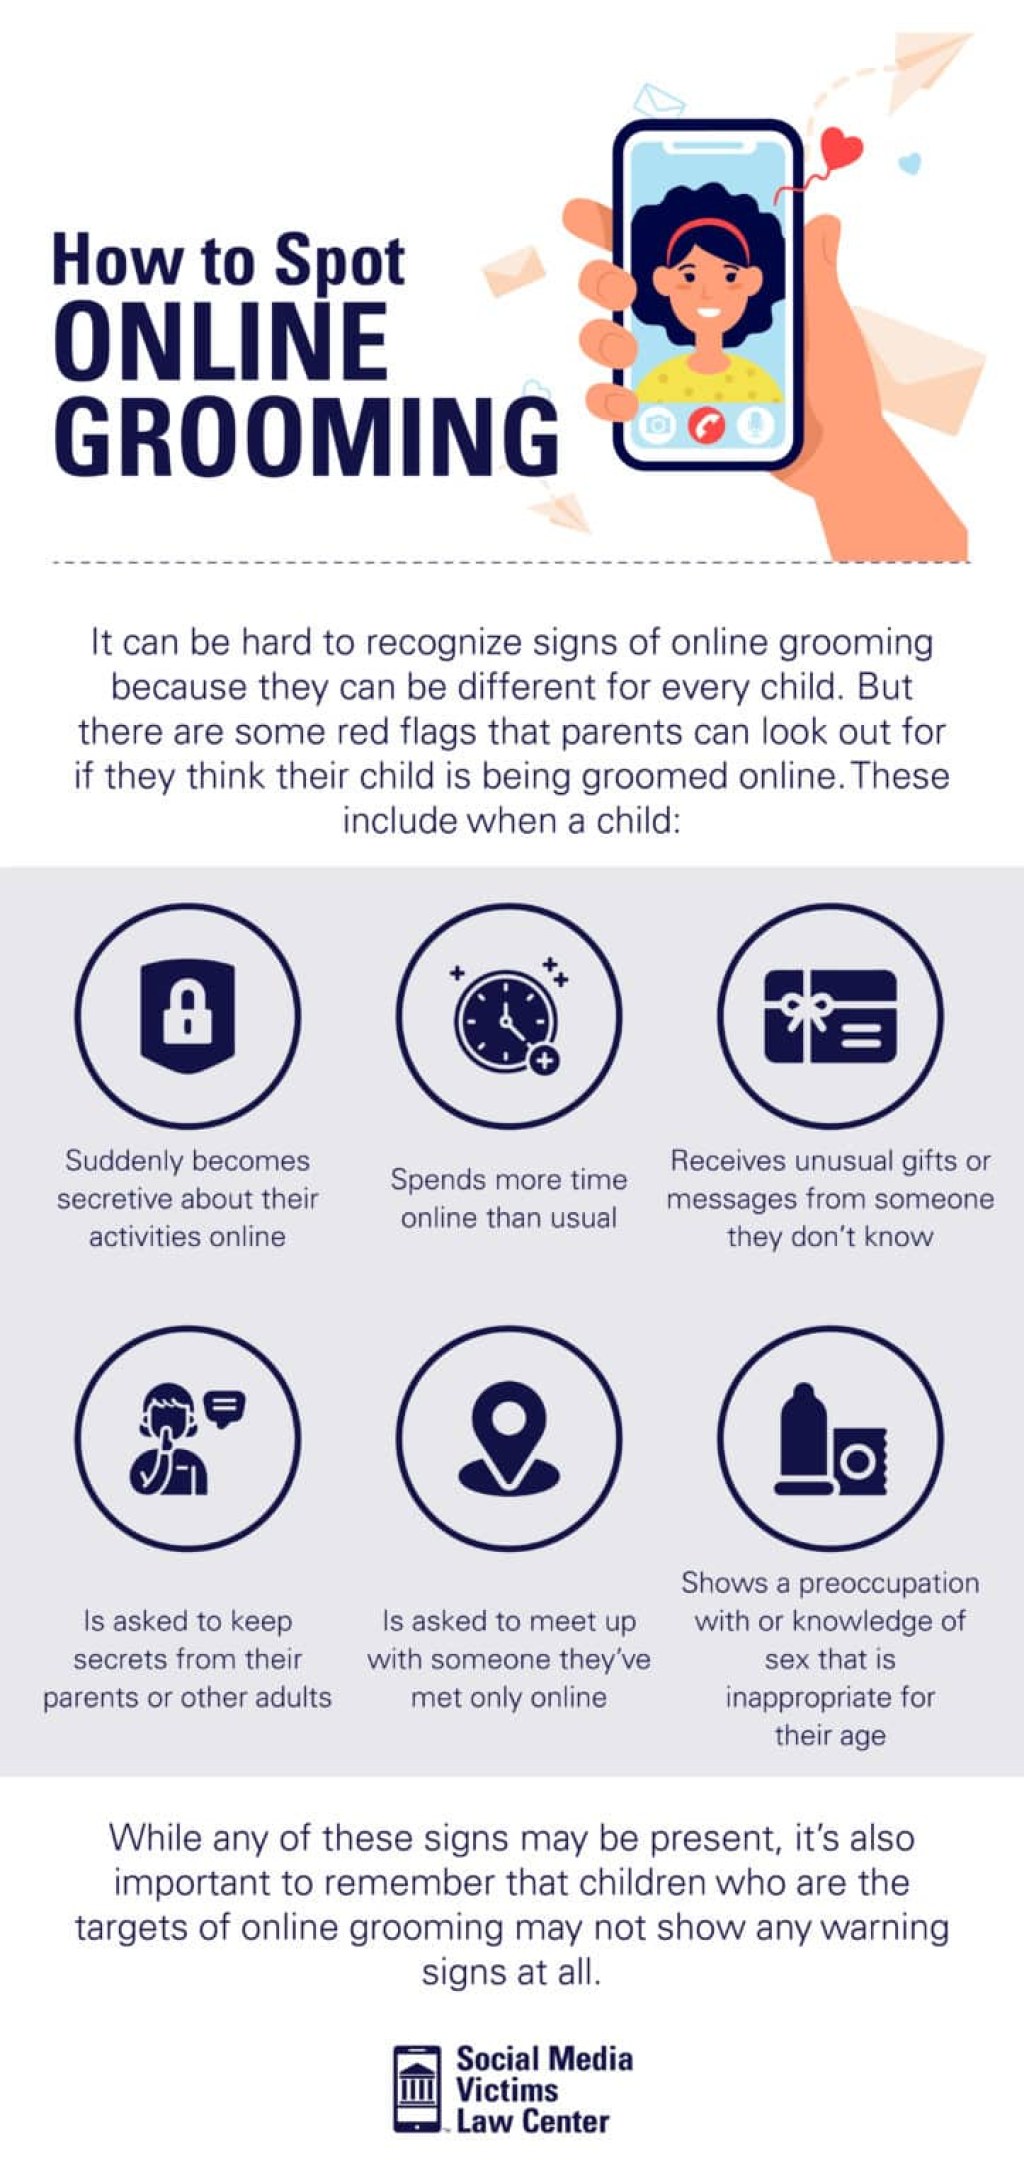 grooming meaning slang - Social Media and Online Grooming  Social Media Victims Law Center